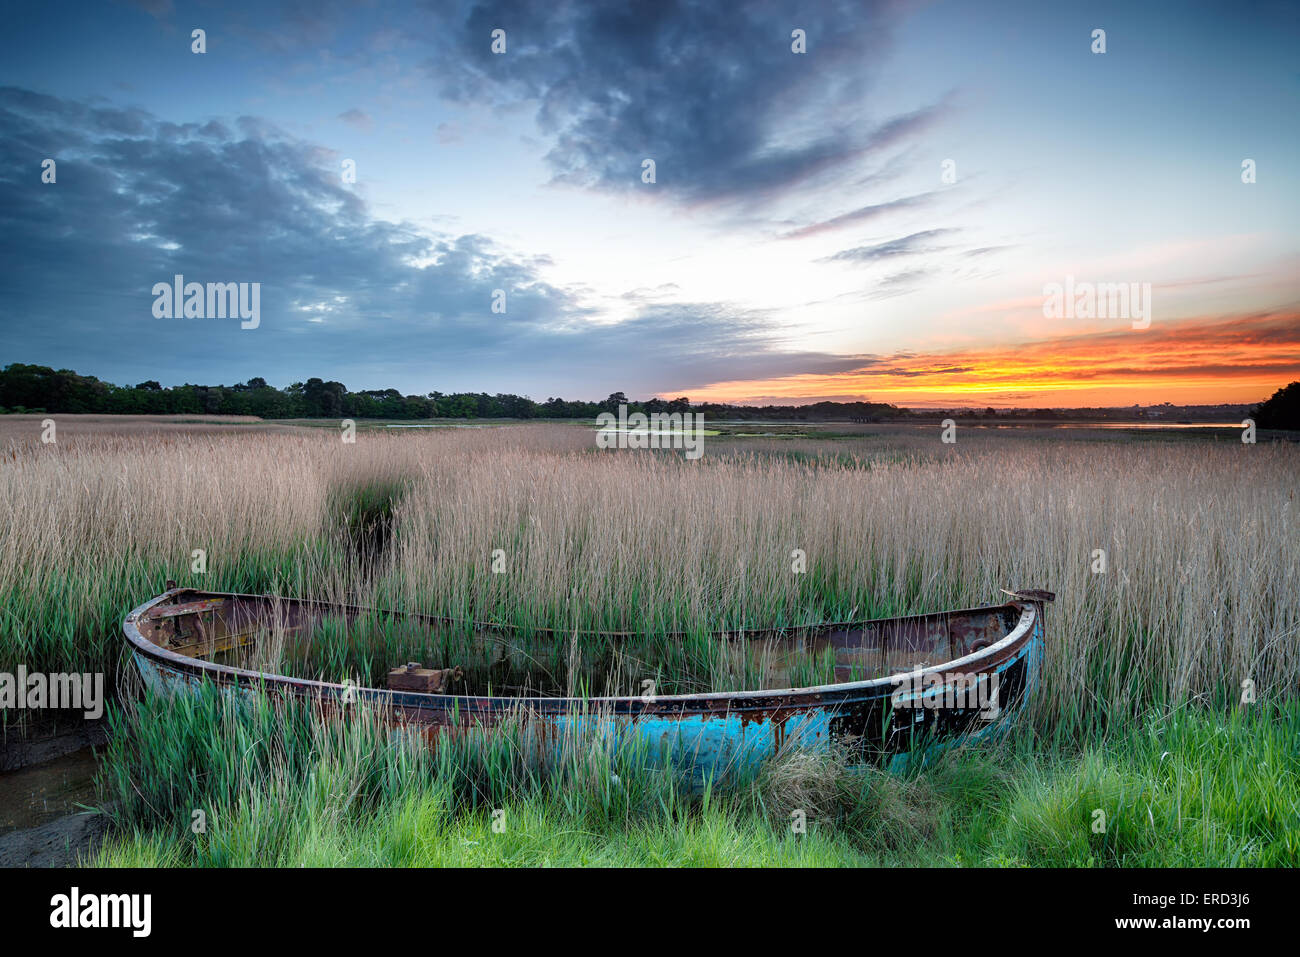 Sunrise over an old fishing boat washed up in reeds at Poole Harbour on the Dorset coast Stock Photo